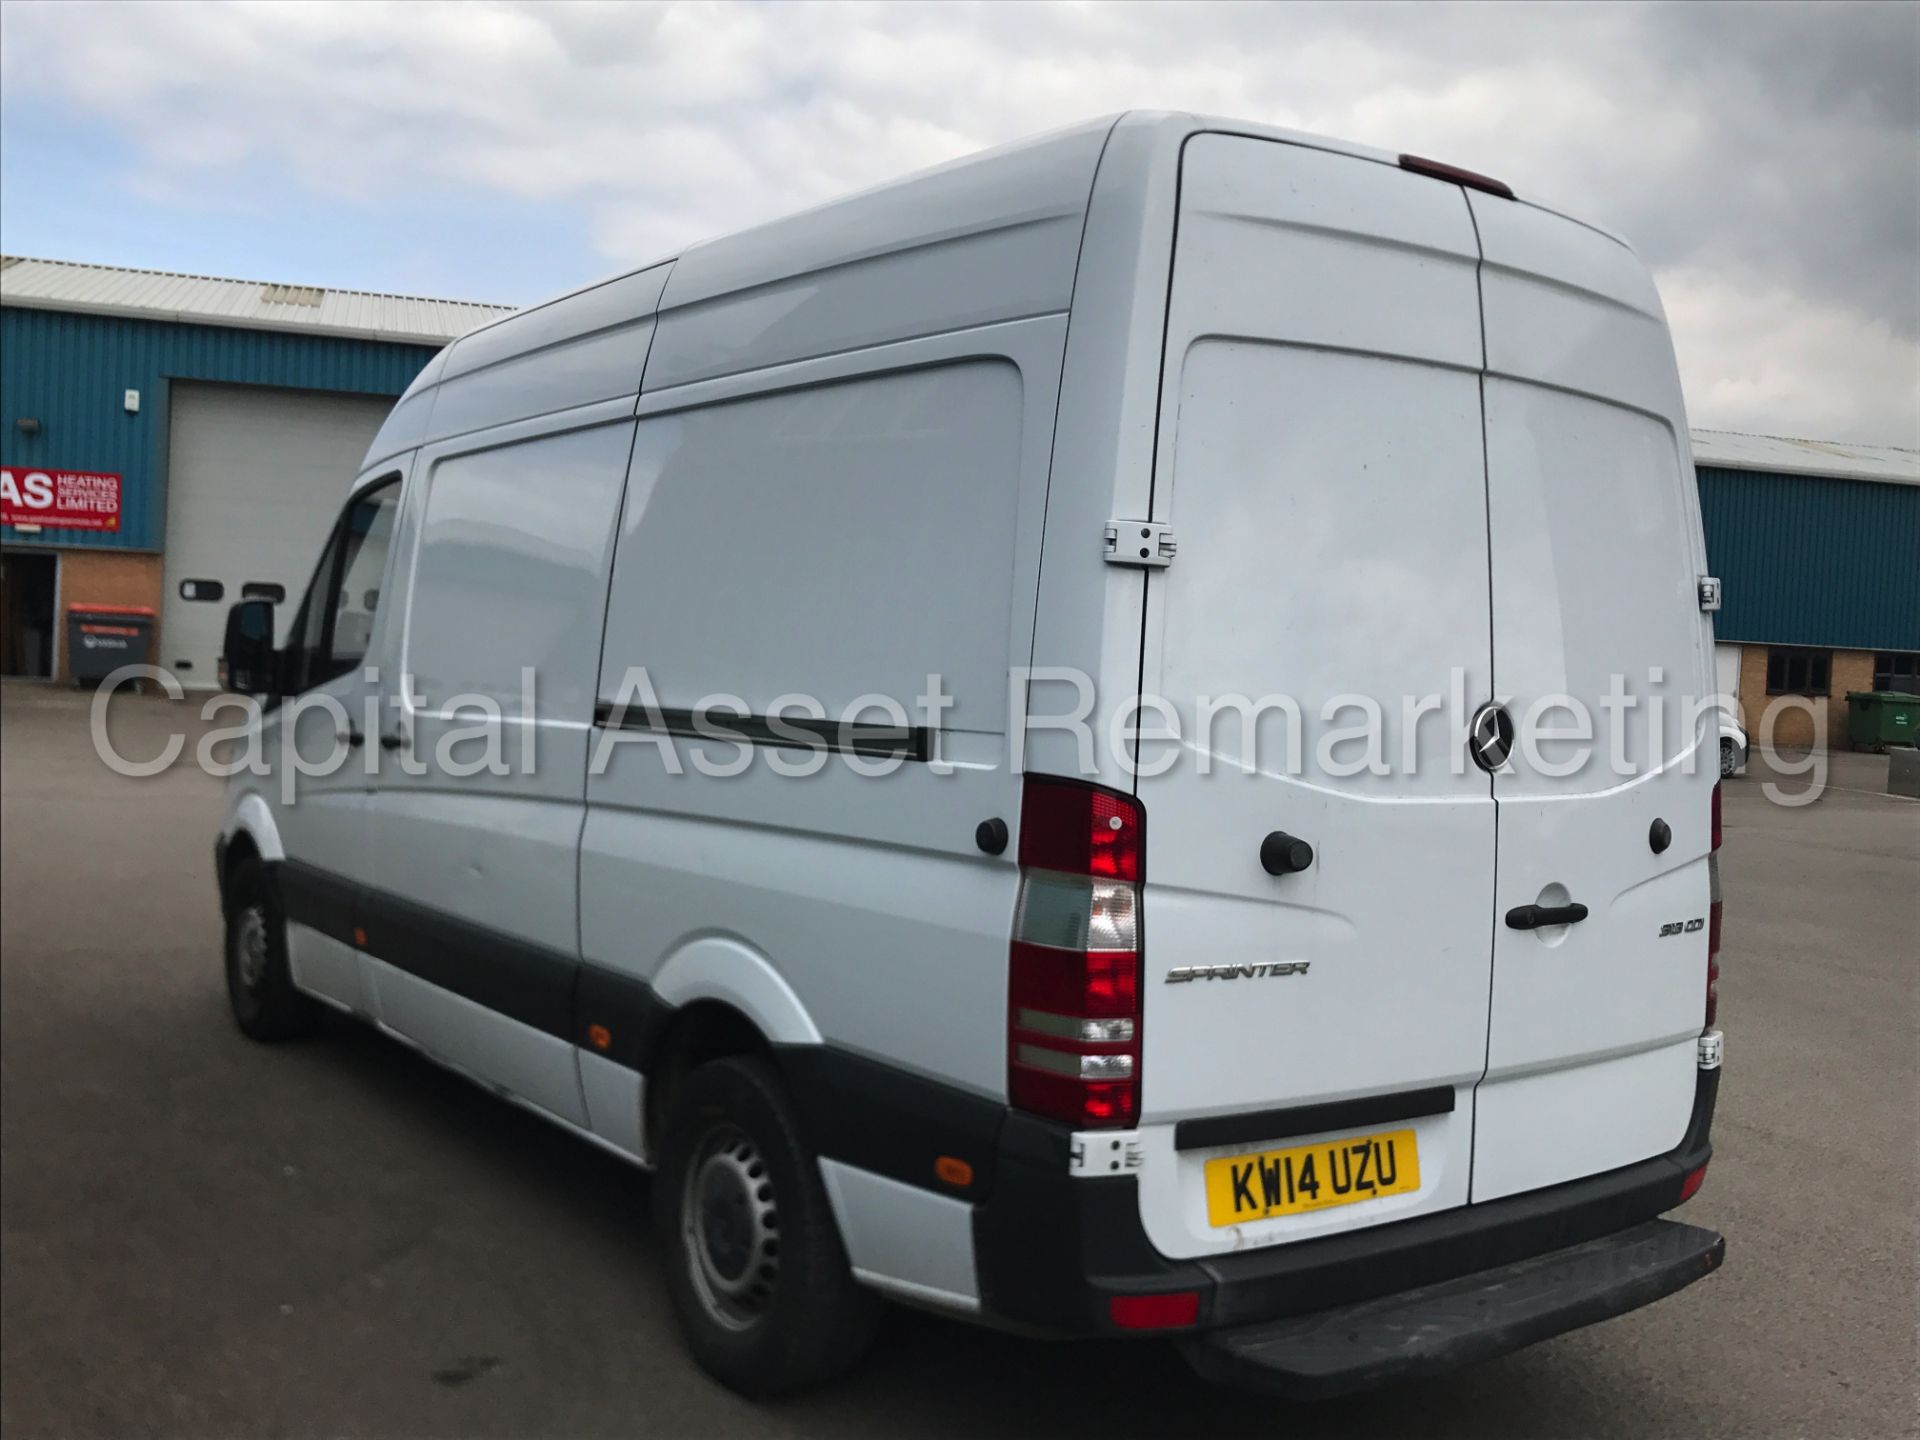 MERCEDES-BENZ SPRINTER 313 CDI 'MWB HI-ROOF' (2014) '130 BHP - 6 SPEED' (1 COMPANY OWNER FROM NEW) - Image 6 of 22